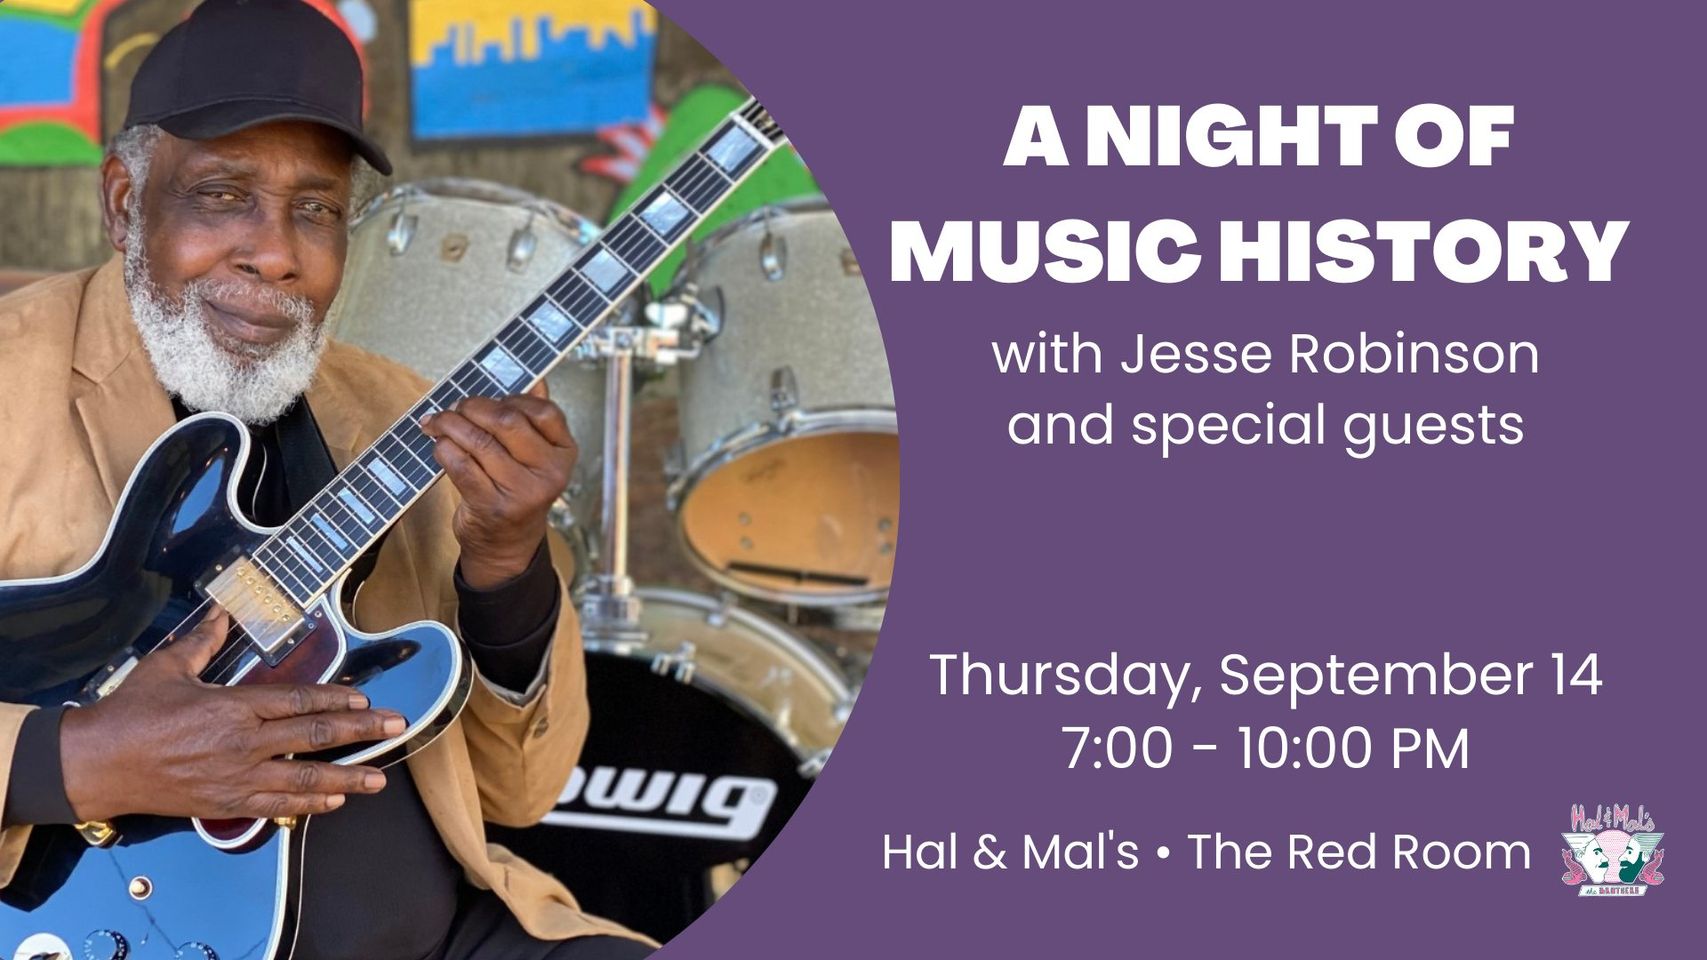 A Night of Music History with Jesse Robinson at Hal & Mal’s